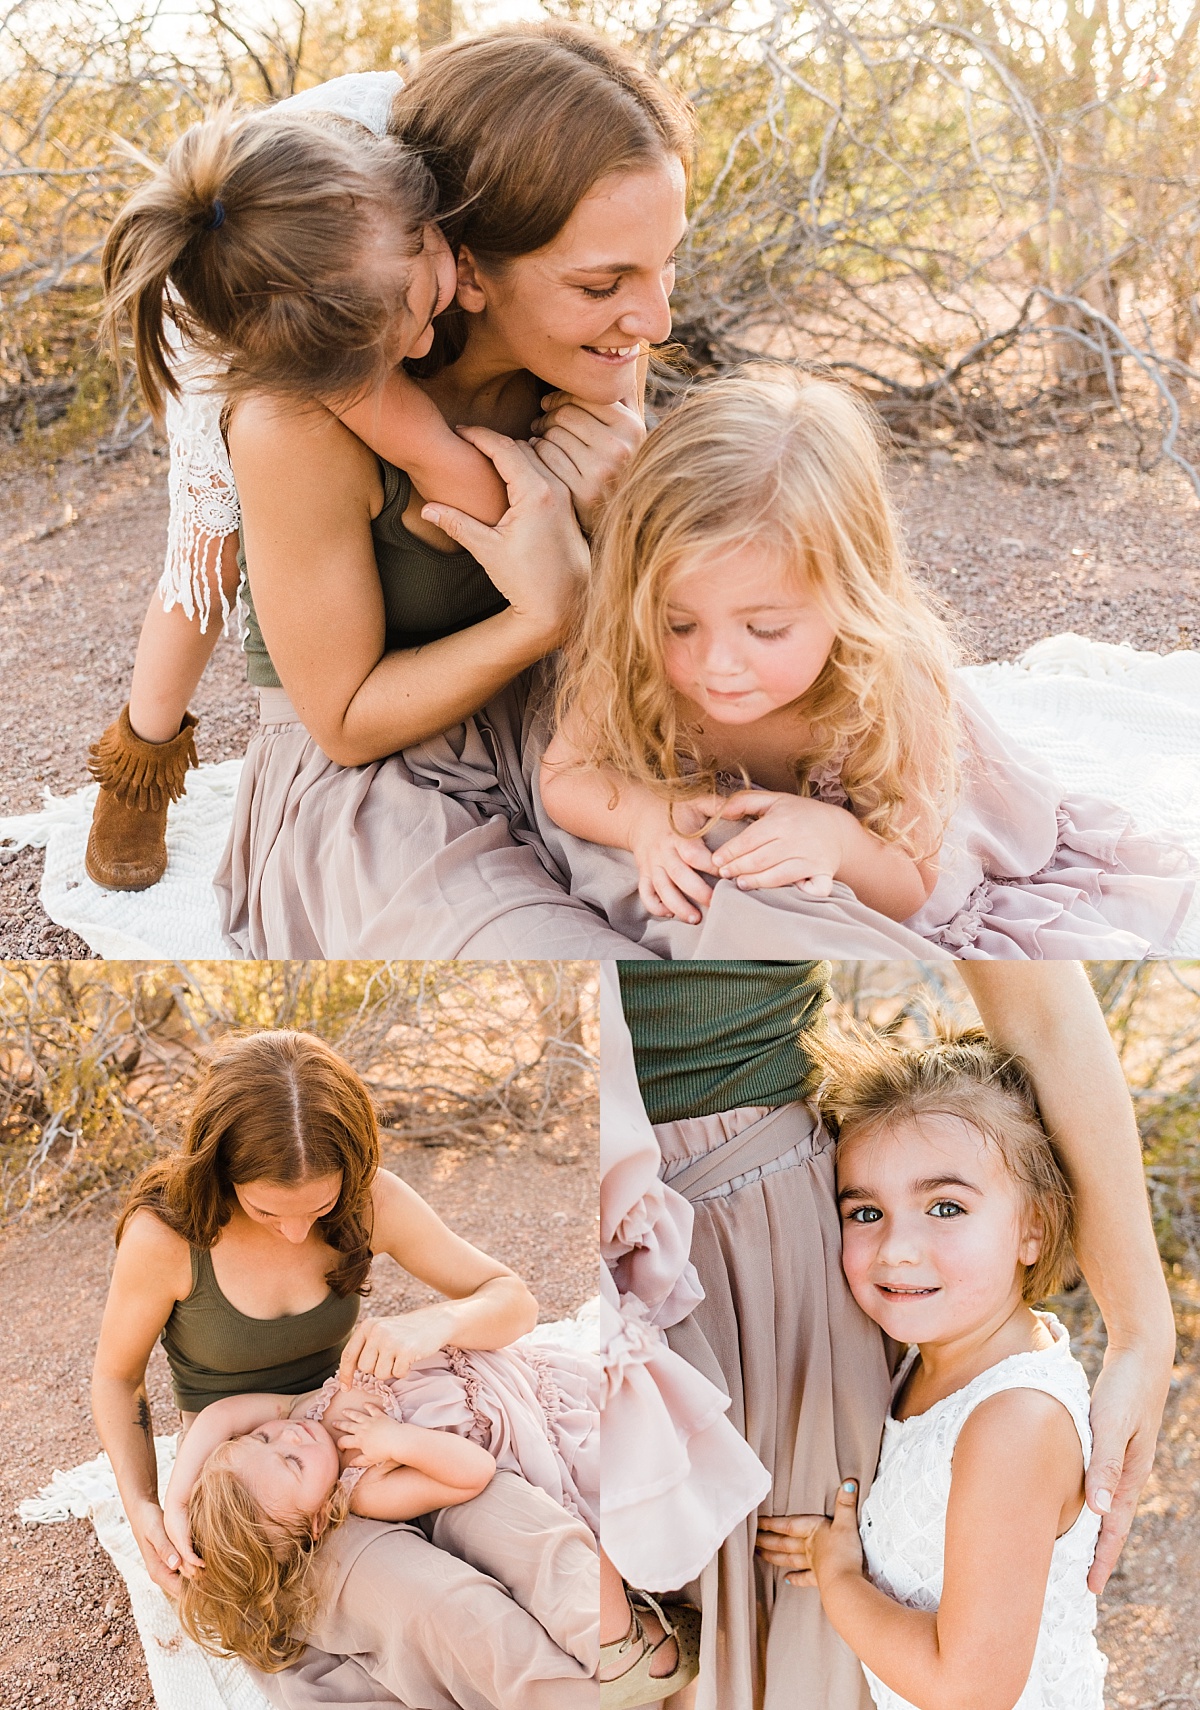 Papago Park Family Pictures | East Valley Family Photographer